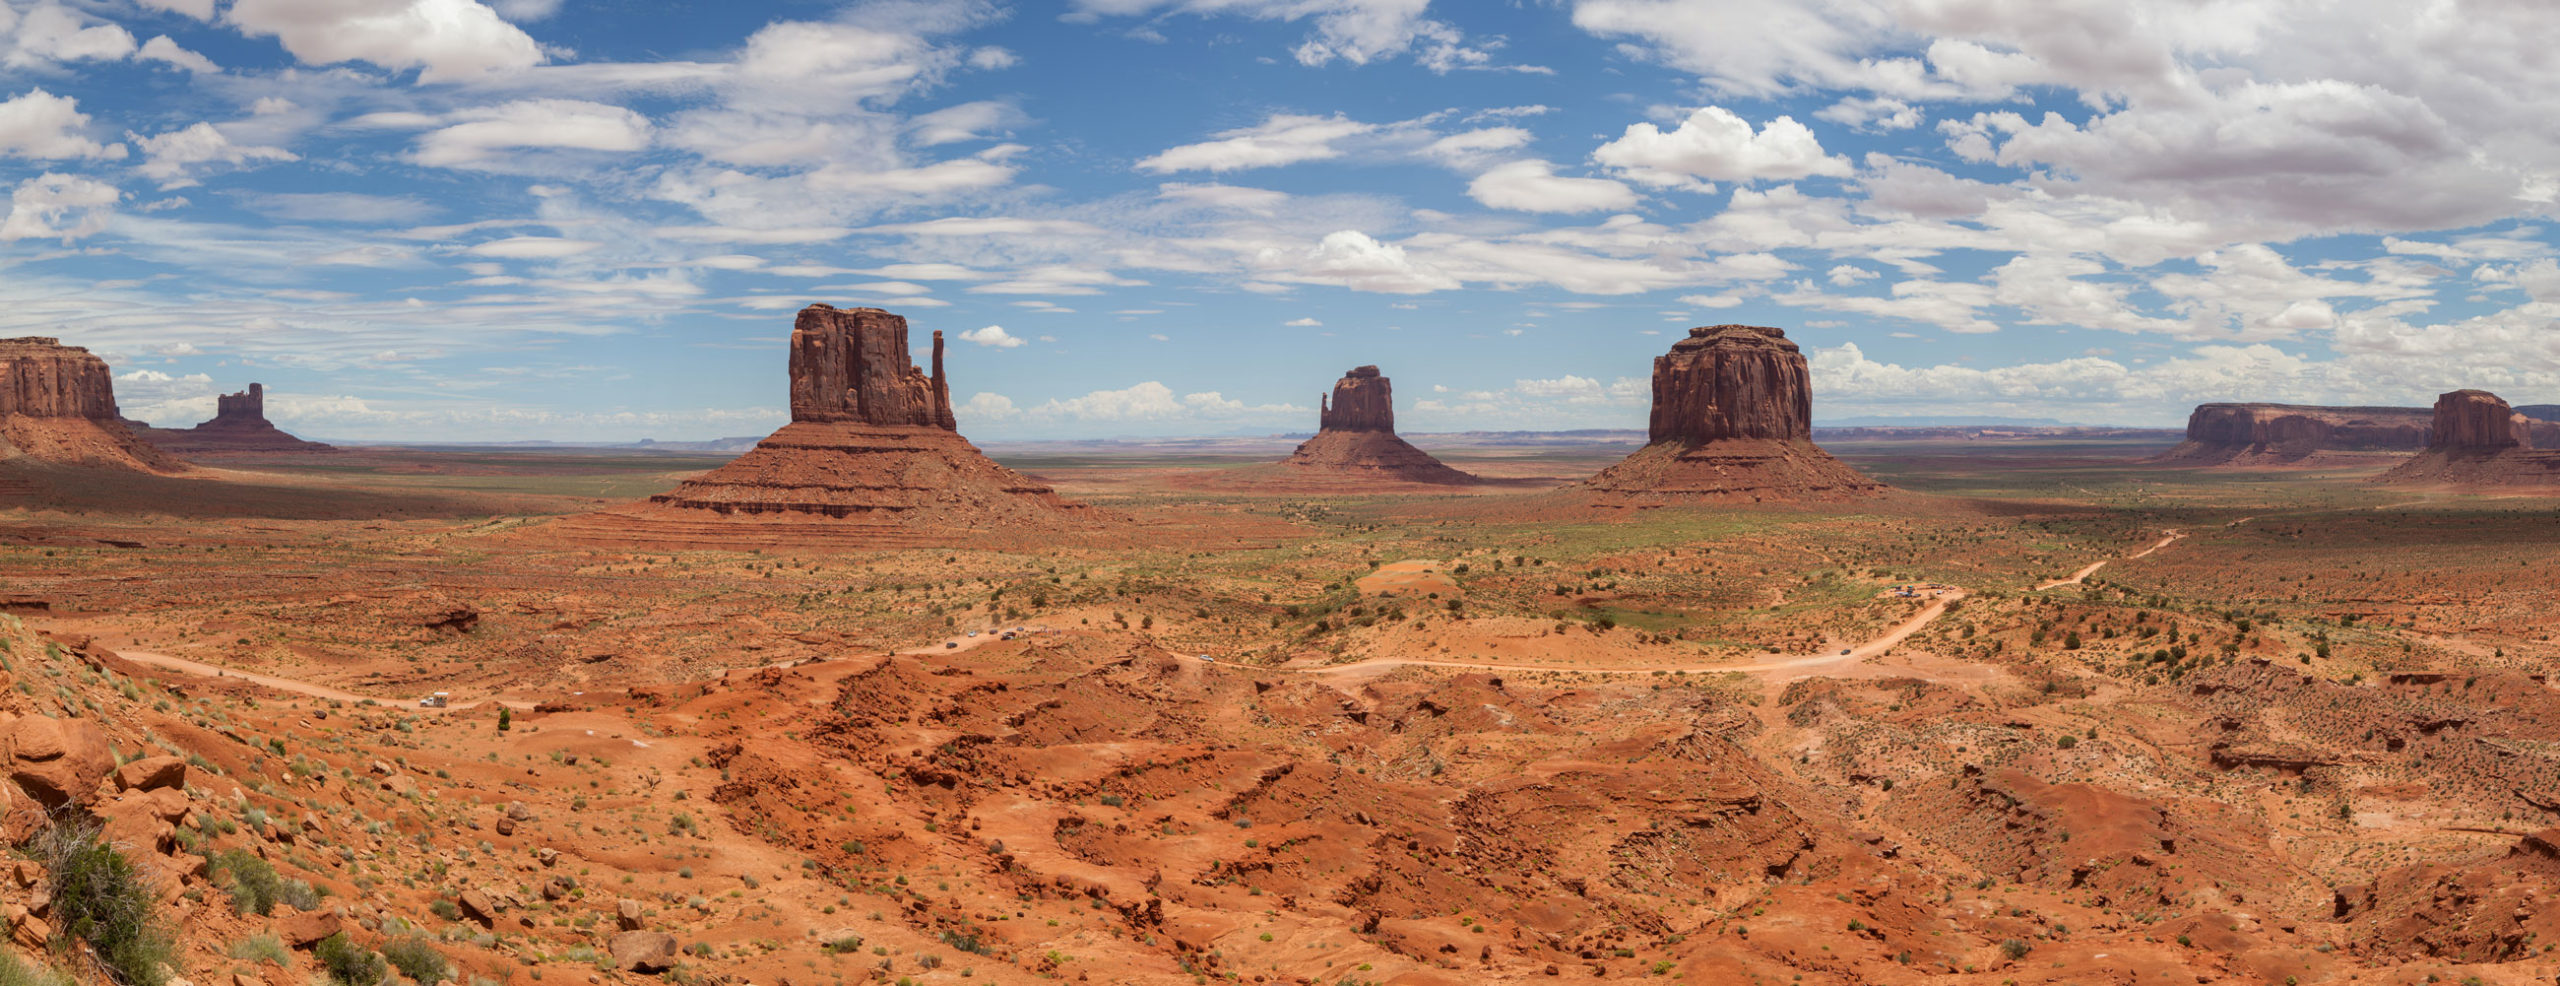 Monument Valley in Utah USA